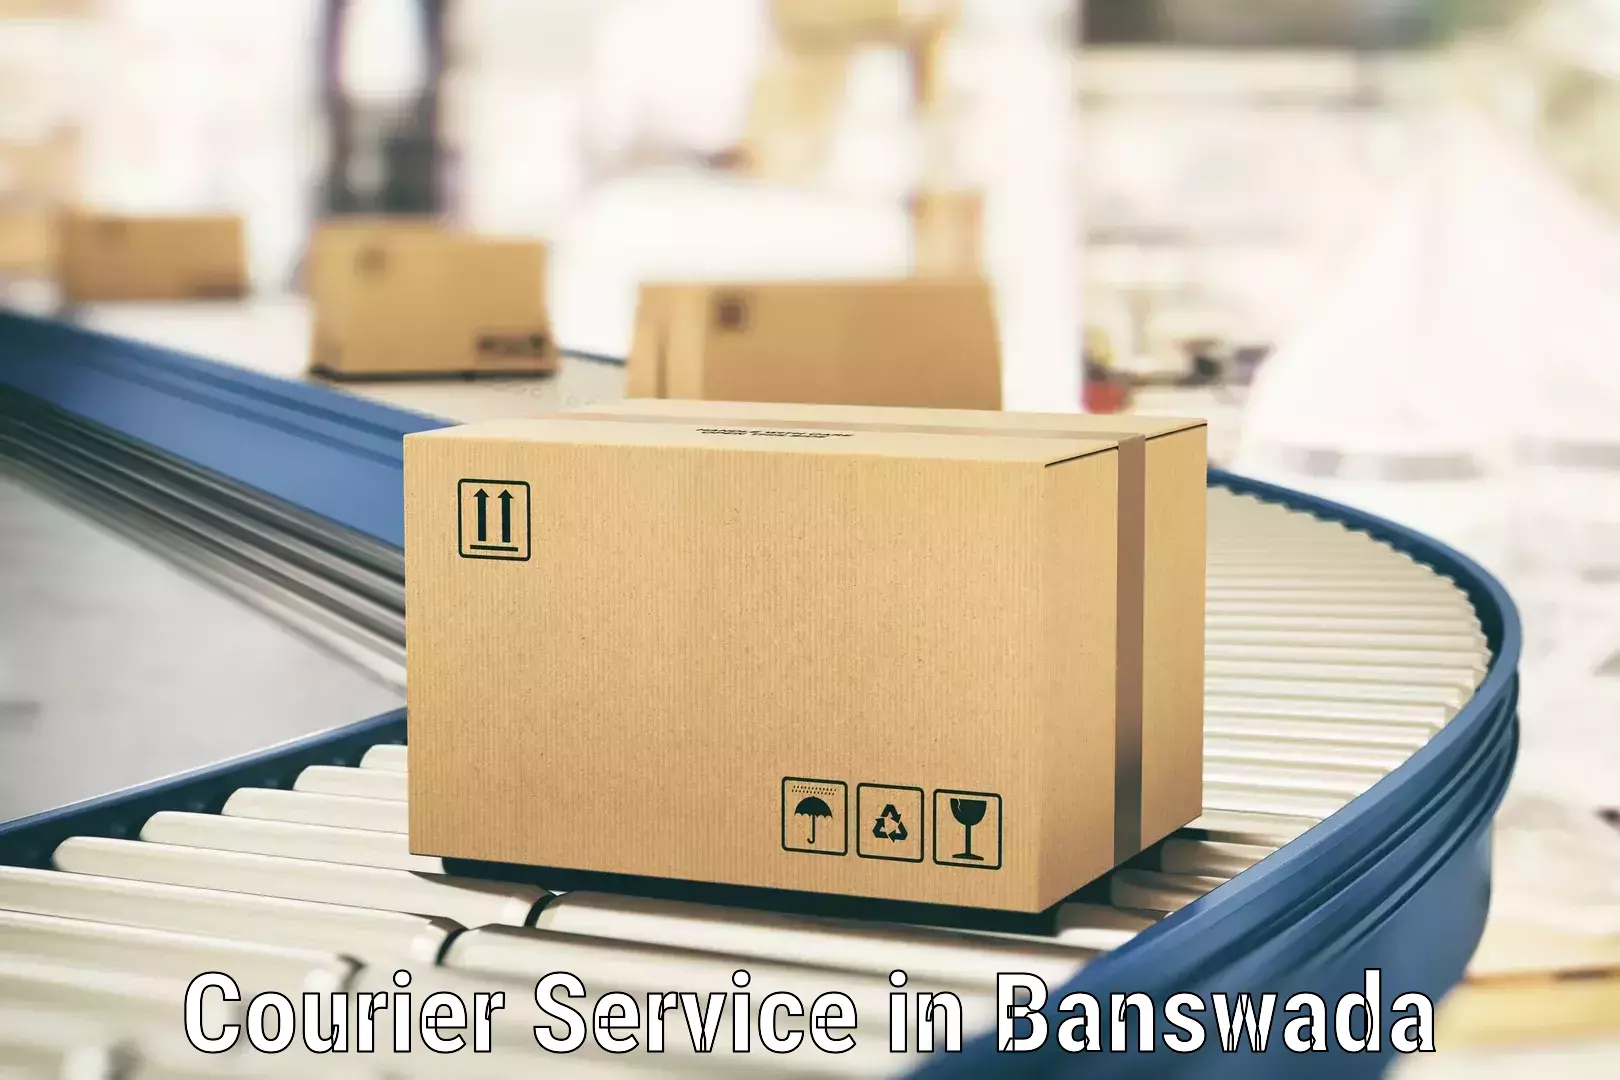 24-hour courier service in Banswada